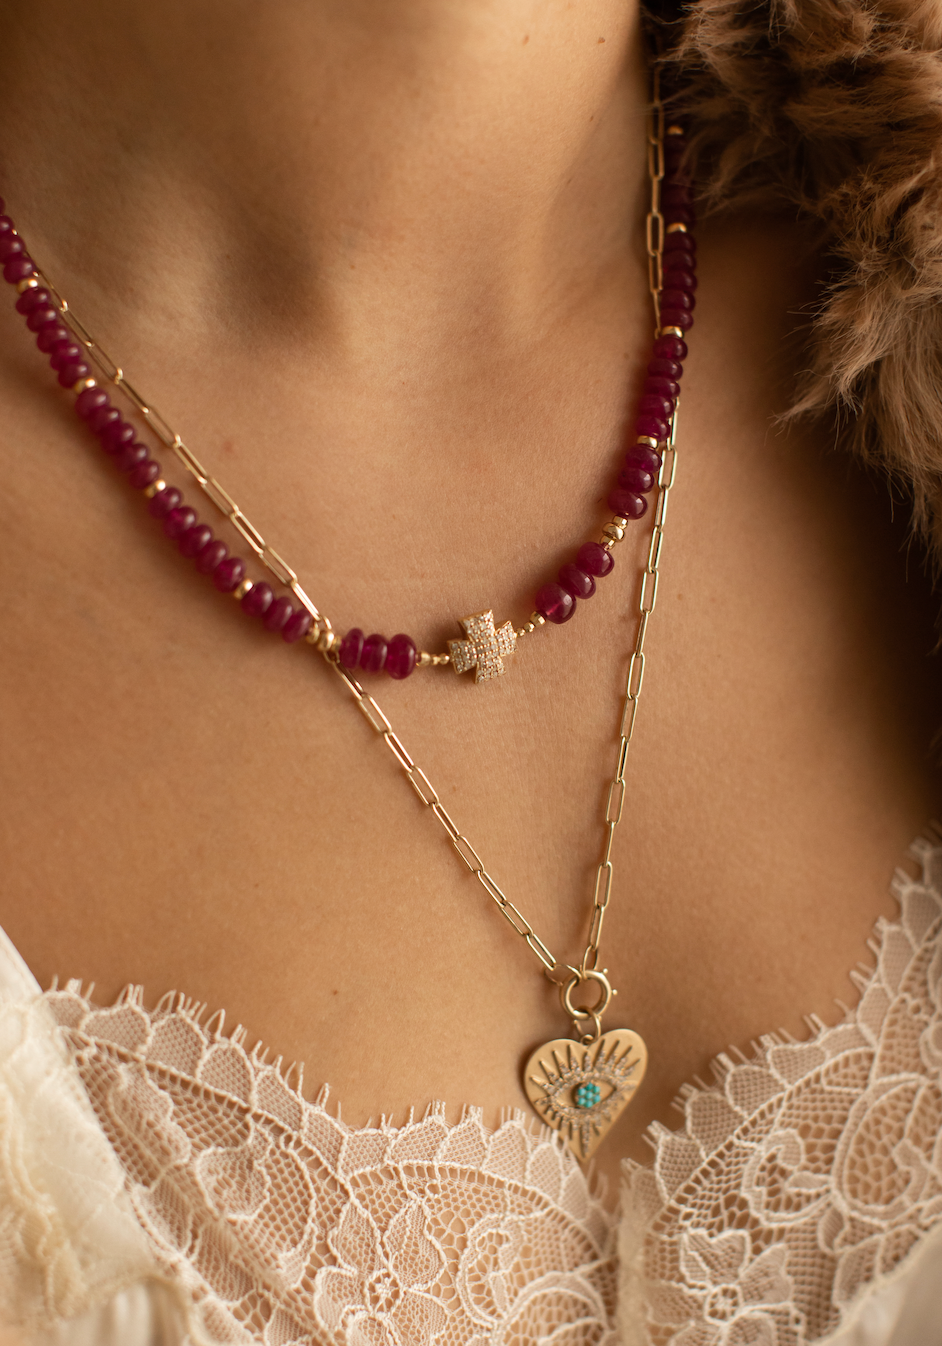 14K GOLD & RUBY NECKLACE WITH DIAMOND CROSS